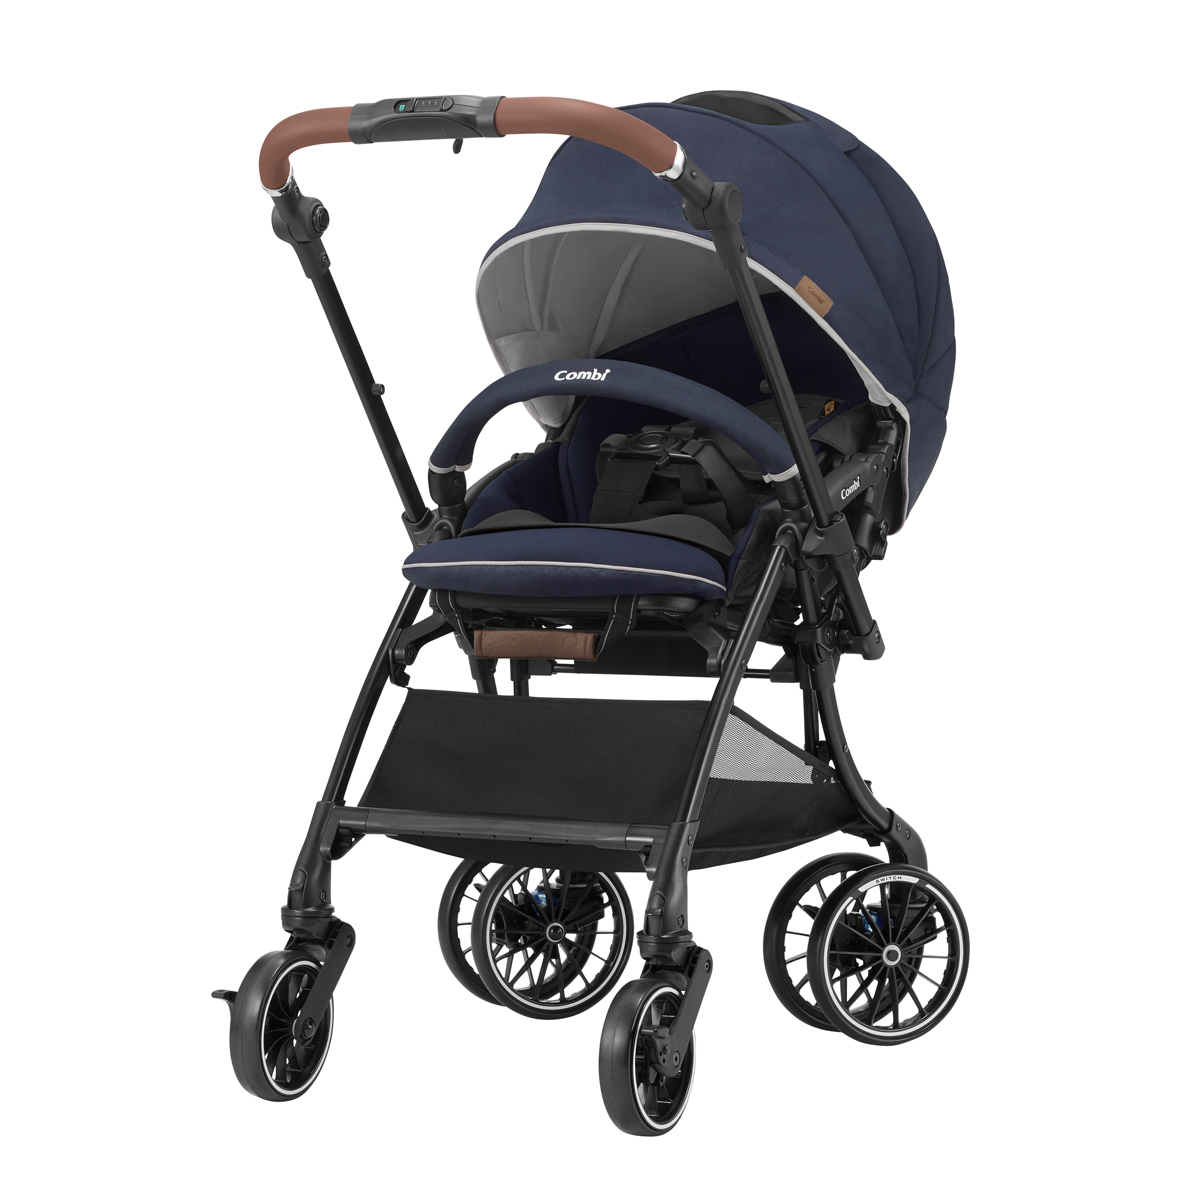 Combi Reversible Handle Stroller - Sugocal Switch